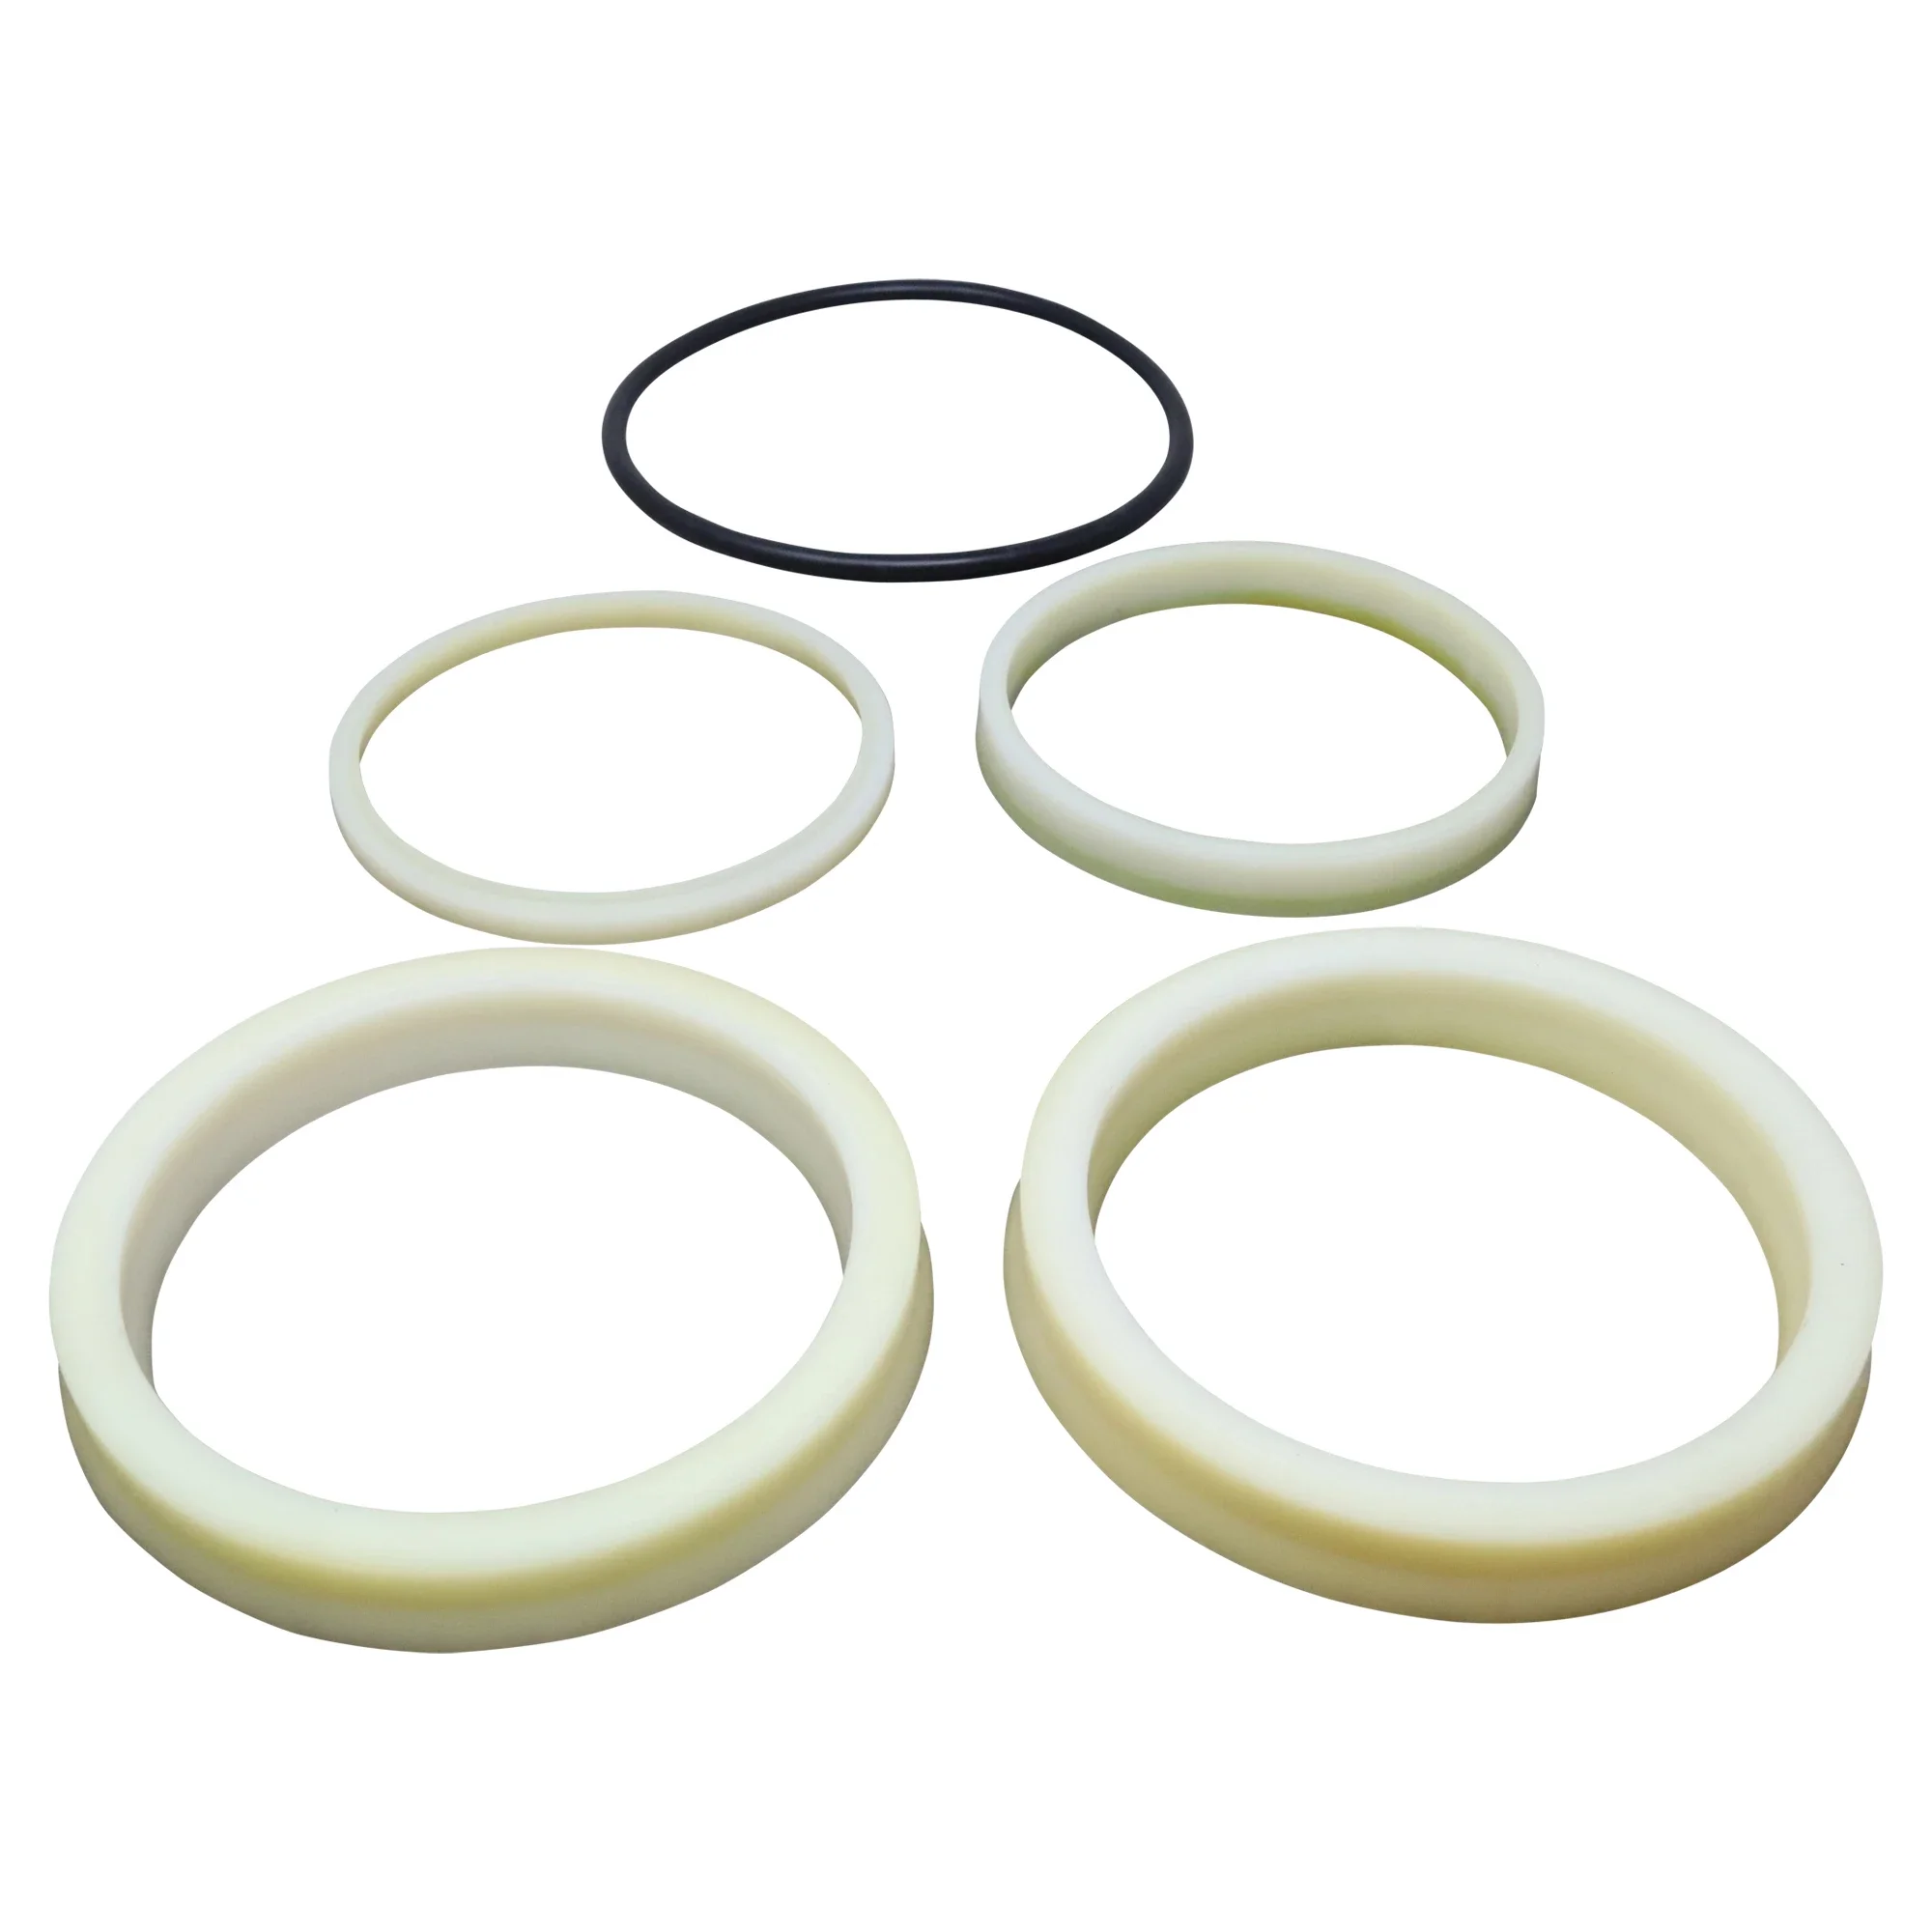 Wastebuilt® Replacement for Leach Cylinder Seal Kit 2R-2114A